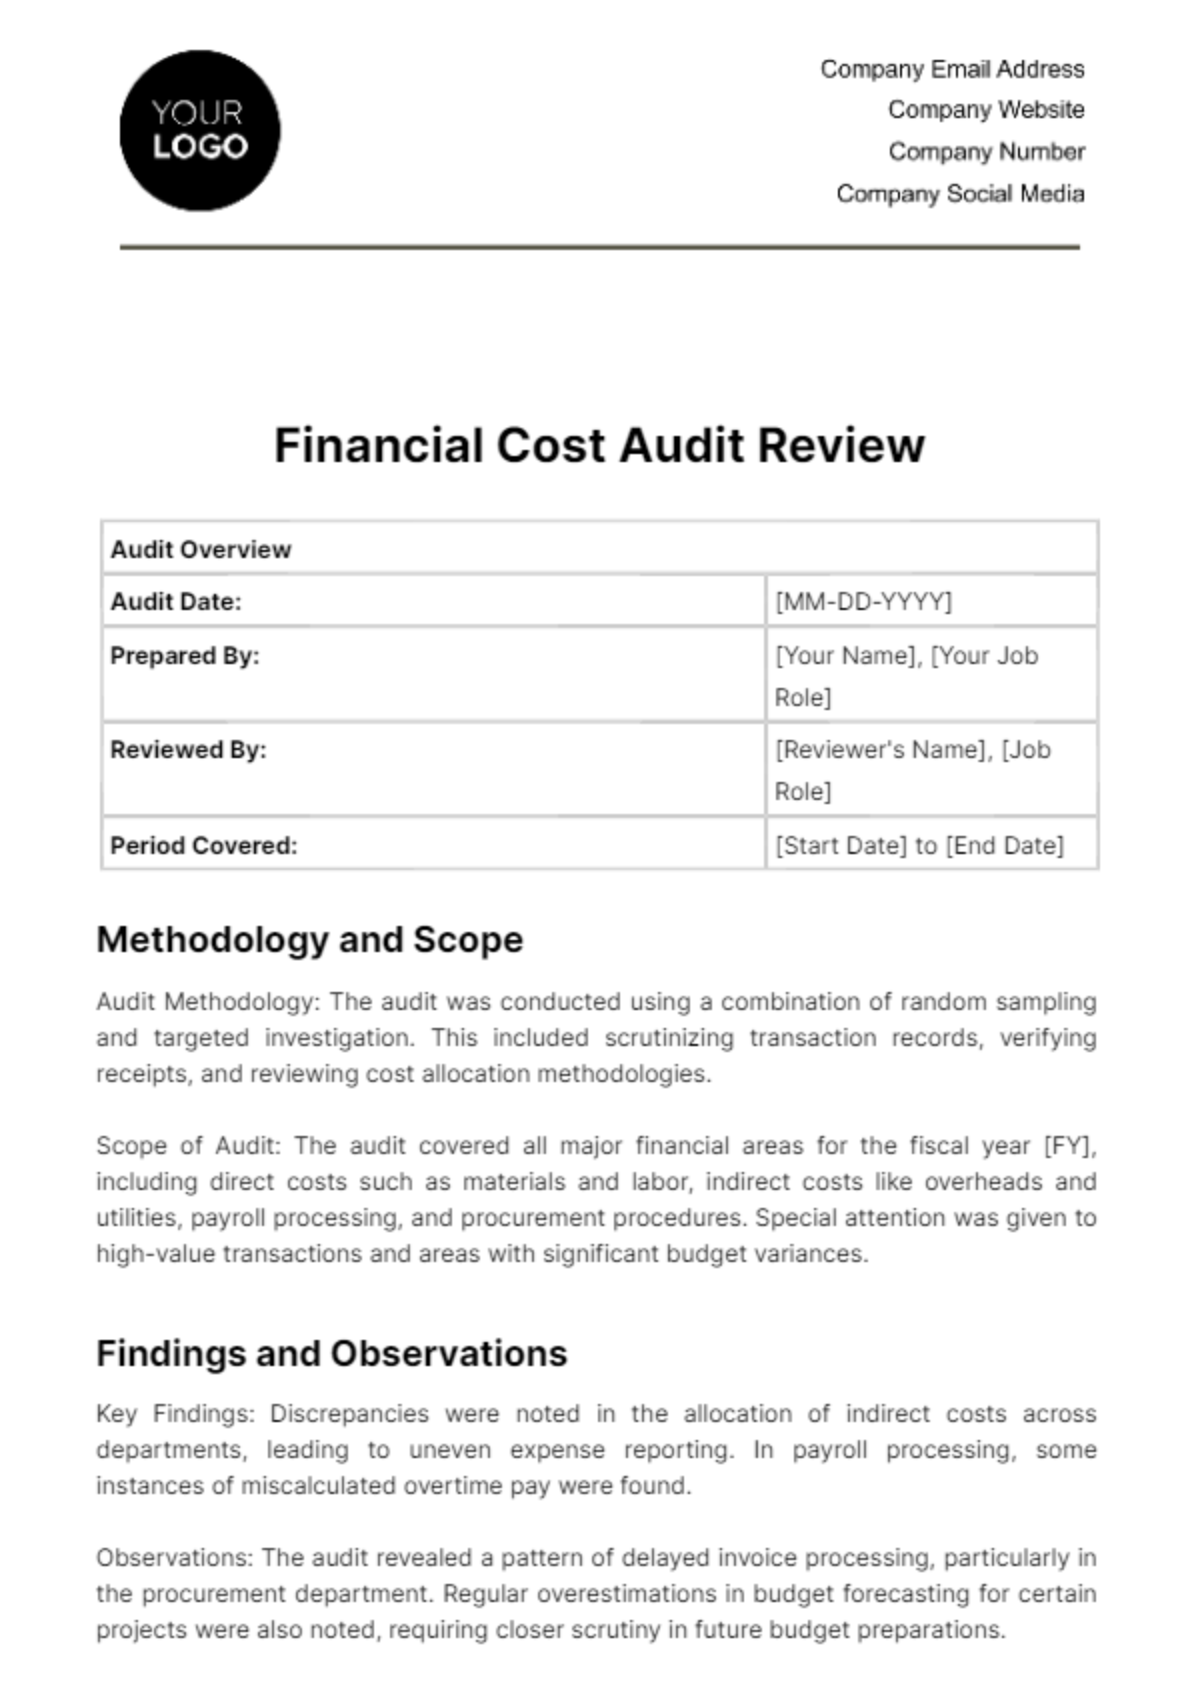 Financial Cost Audit Review Template